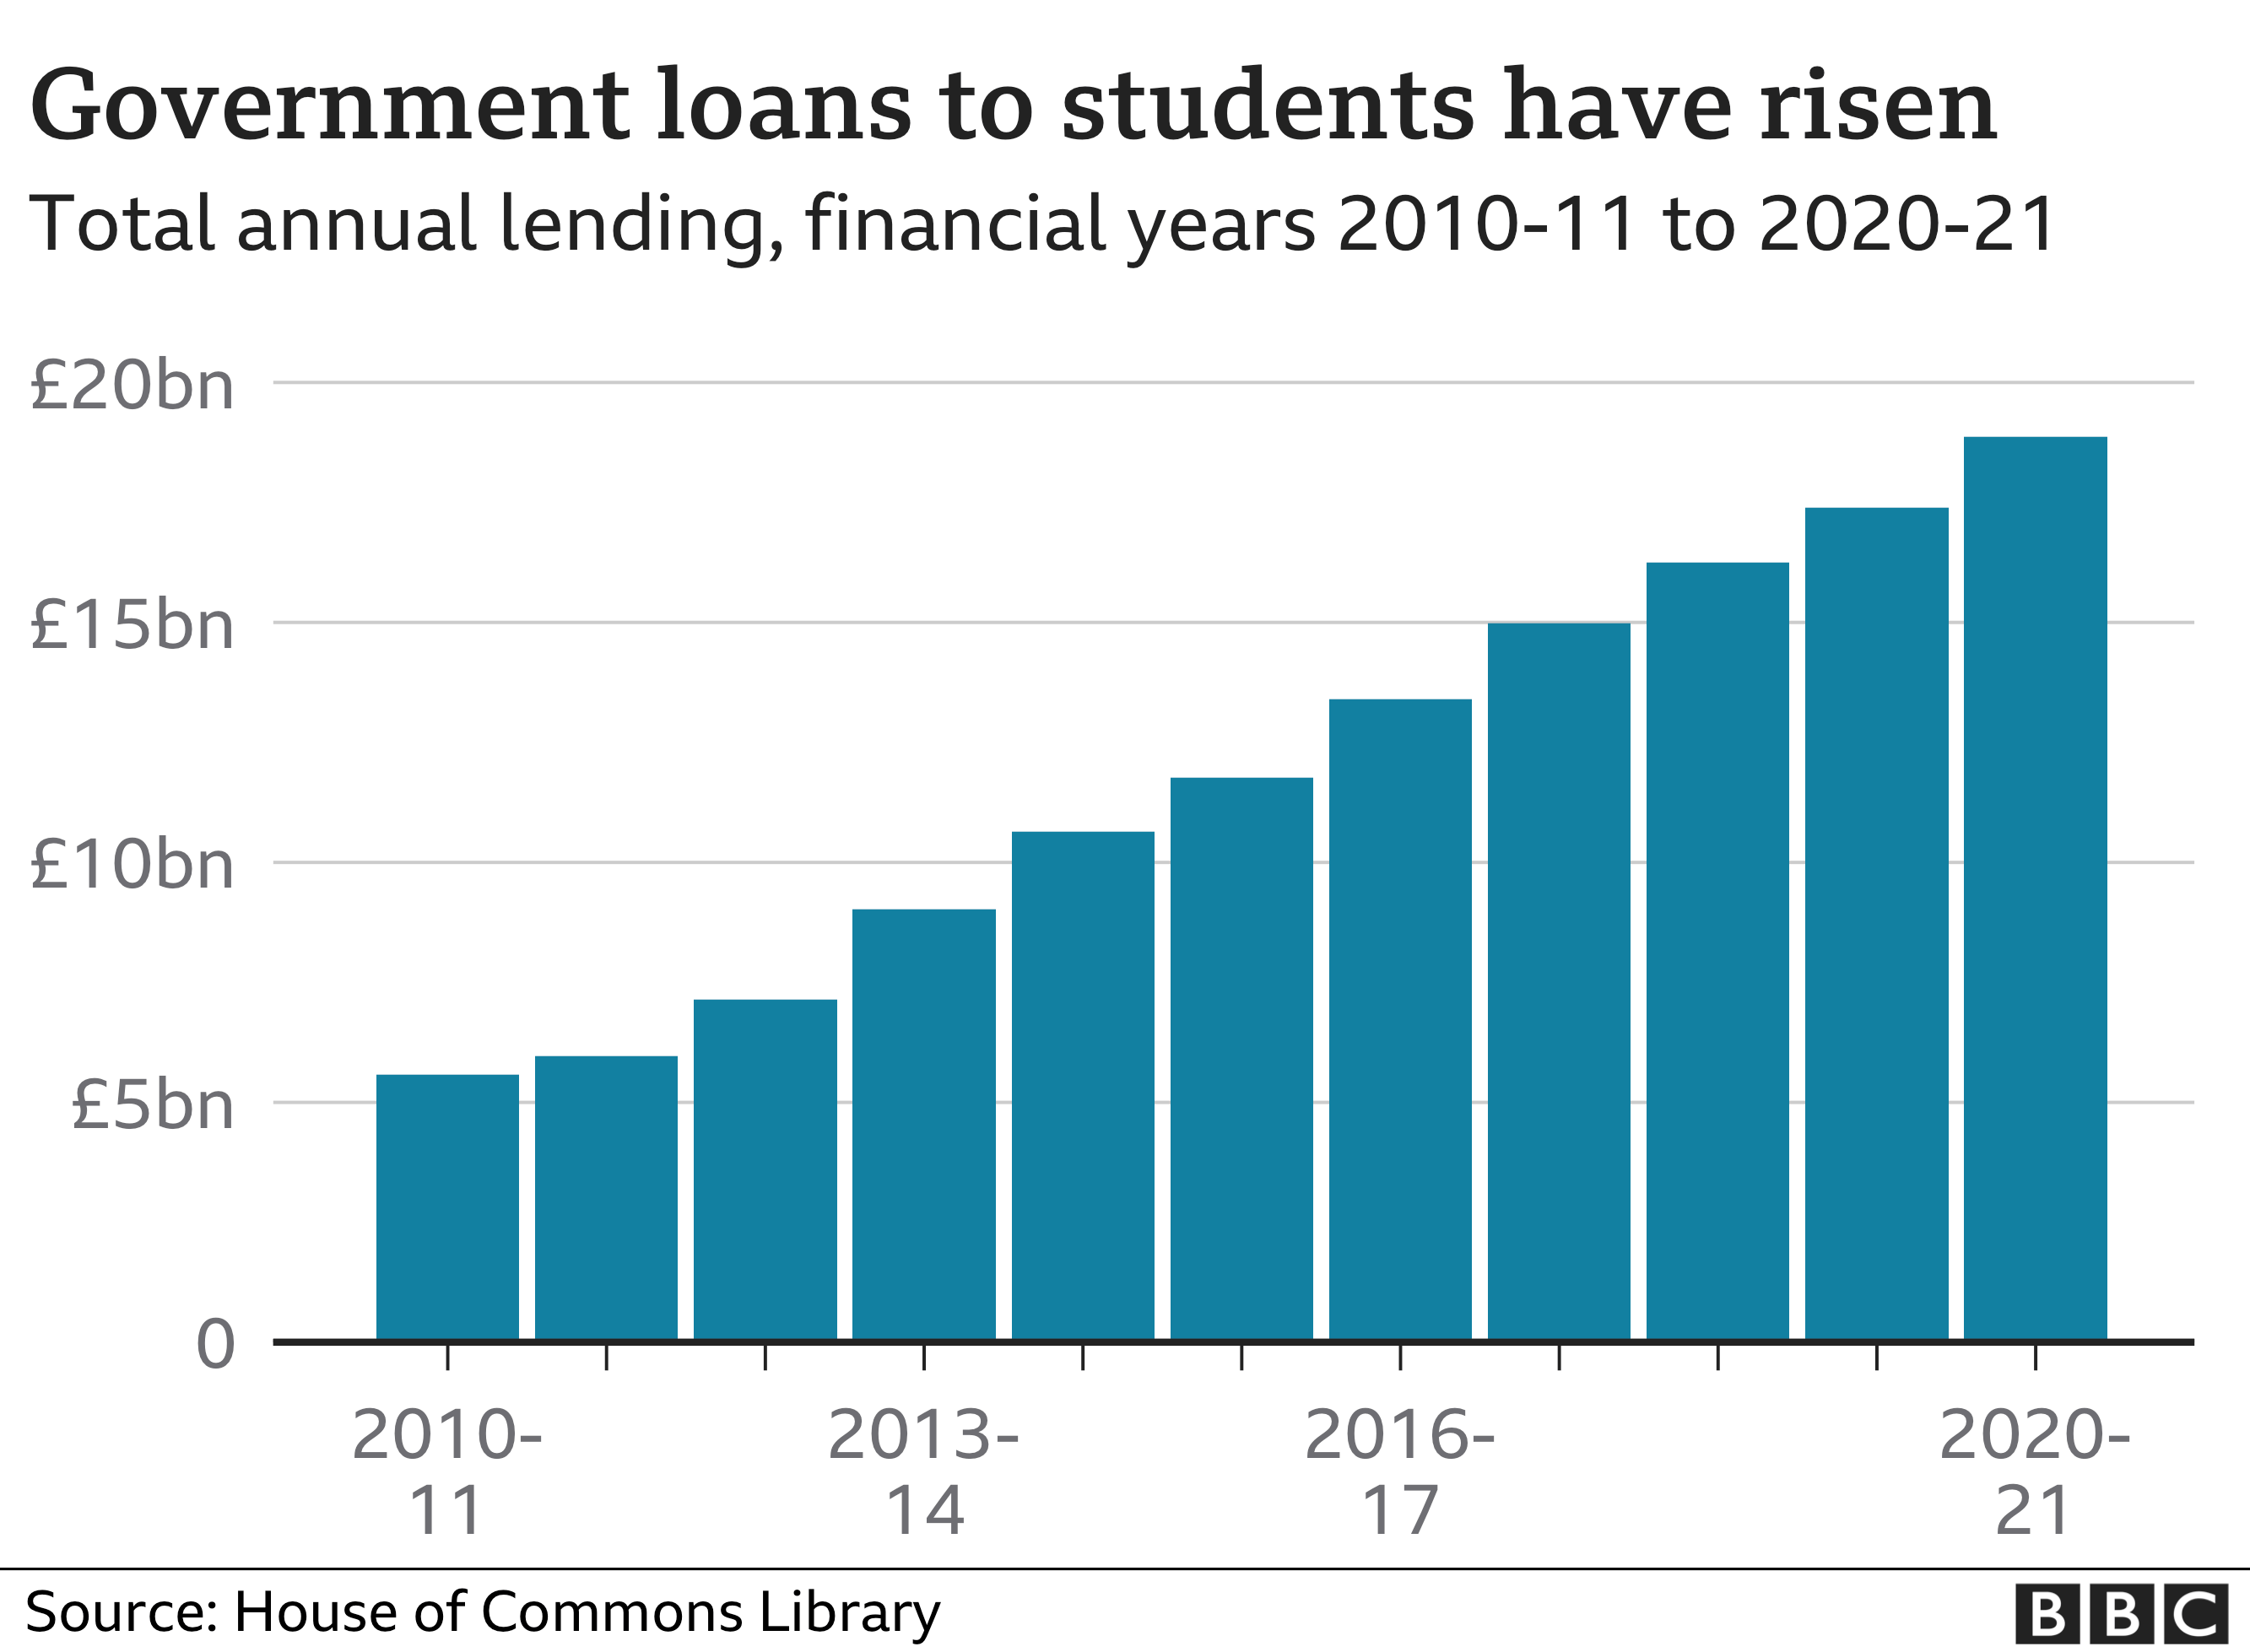 Graph showing government loans to students have risen